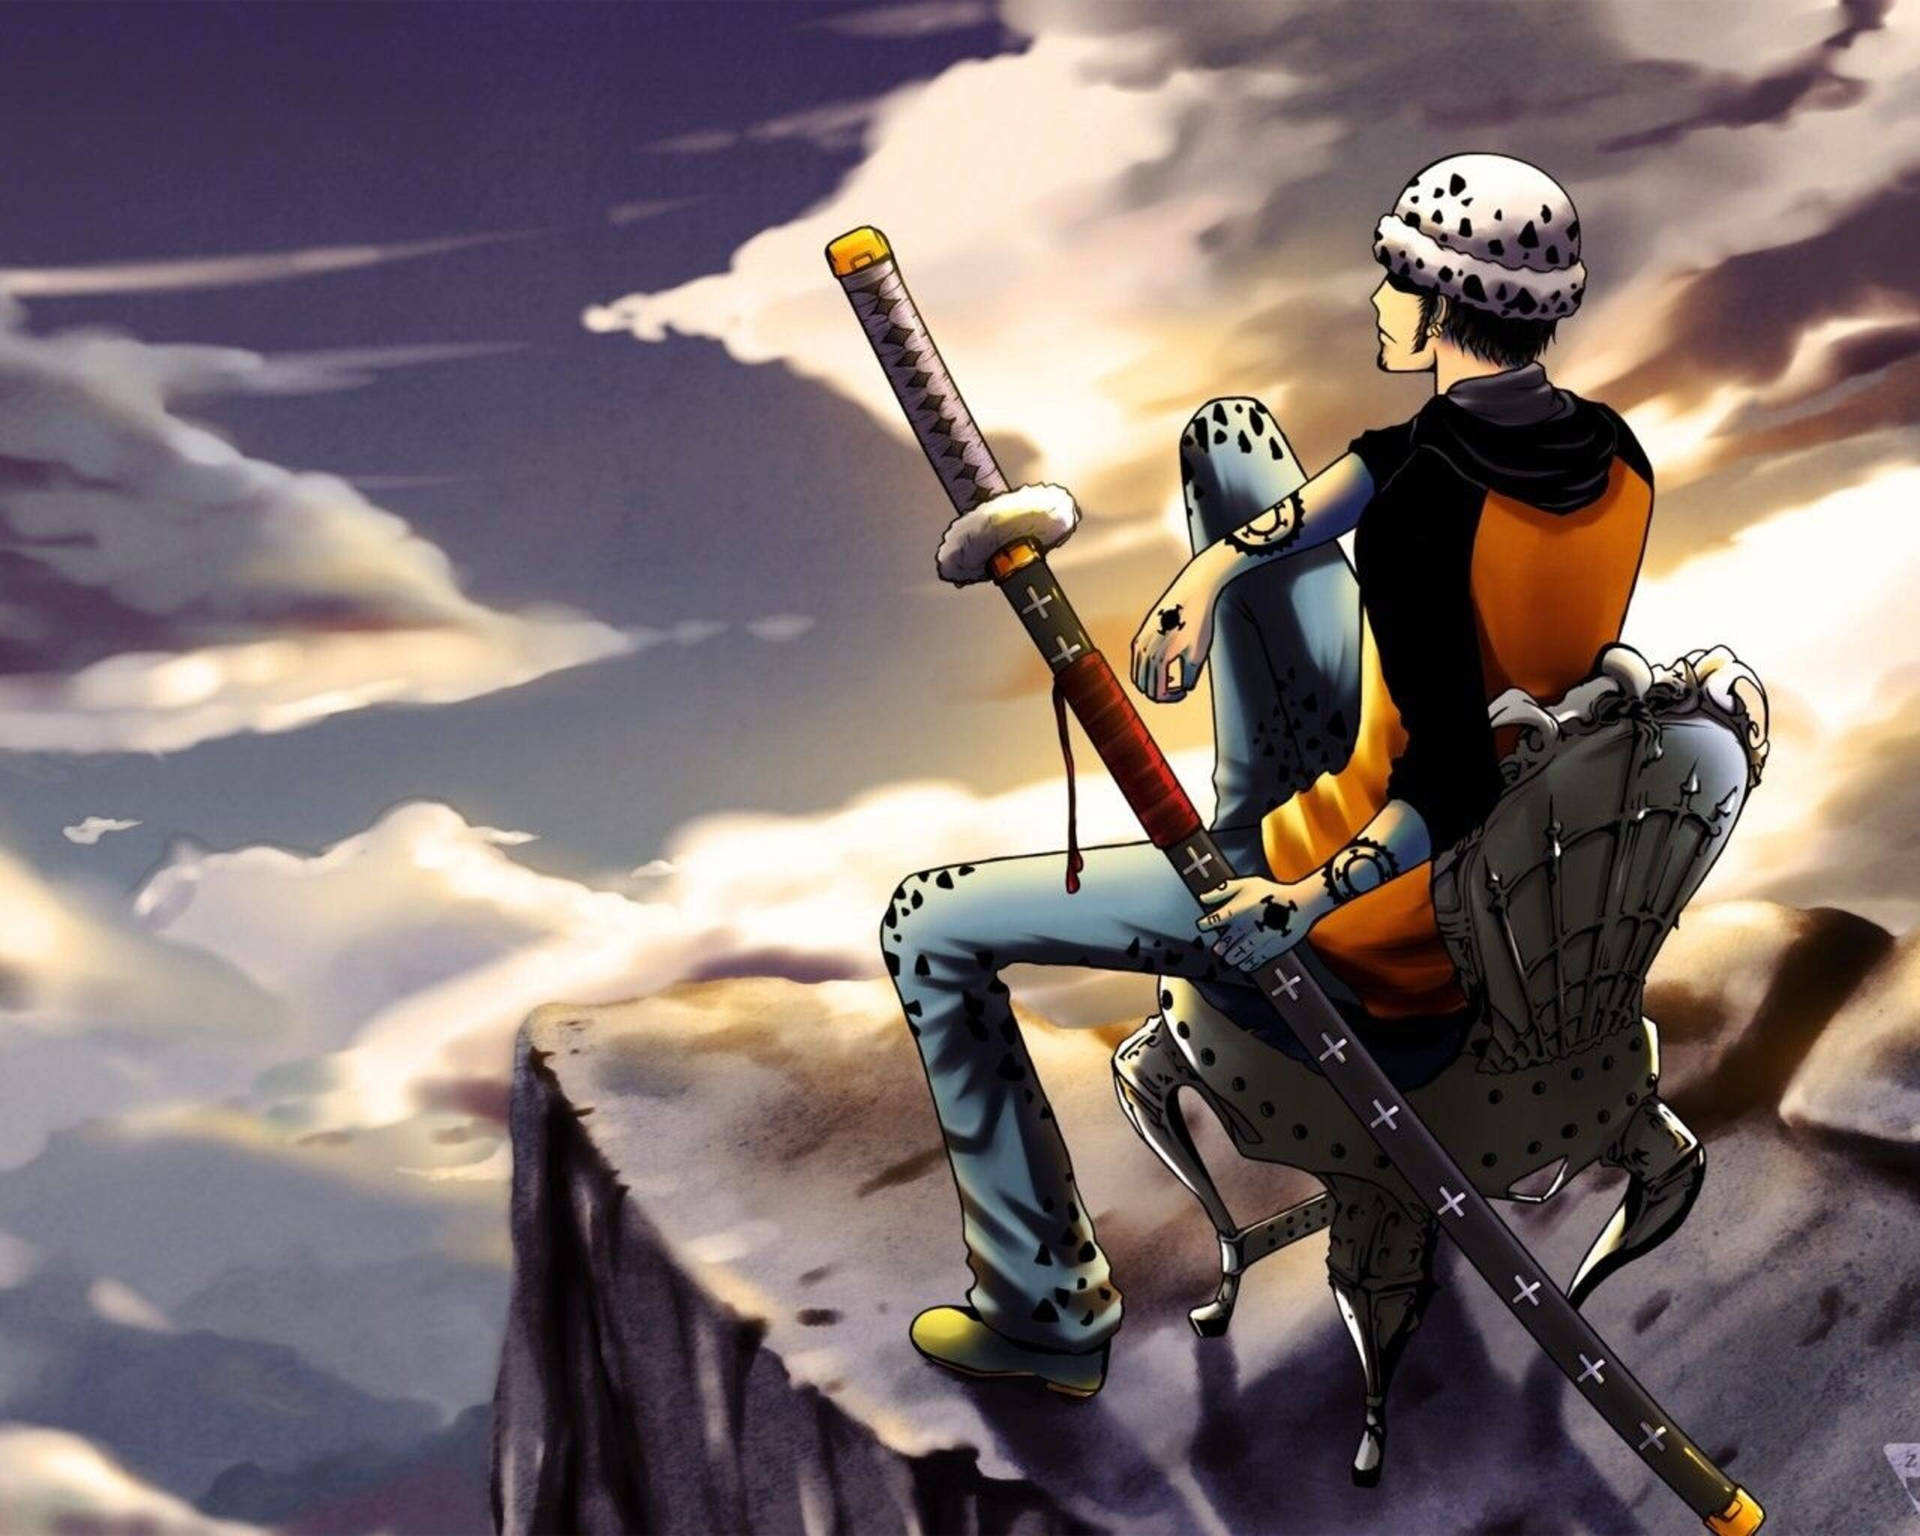 Chilling Out With Trafalgar Law